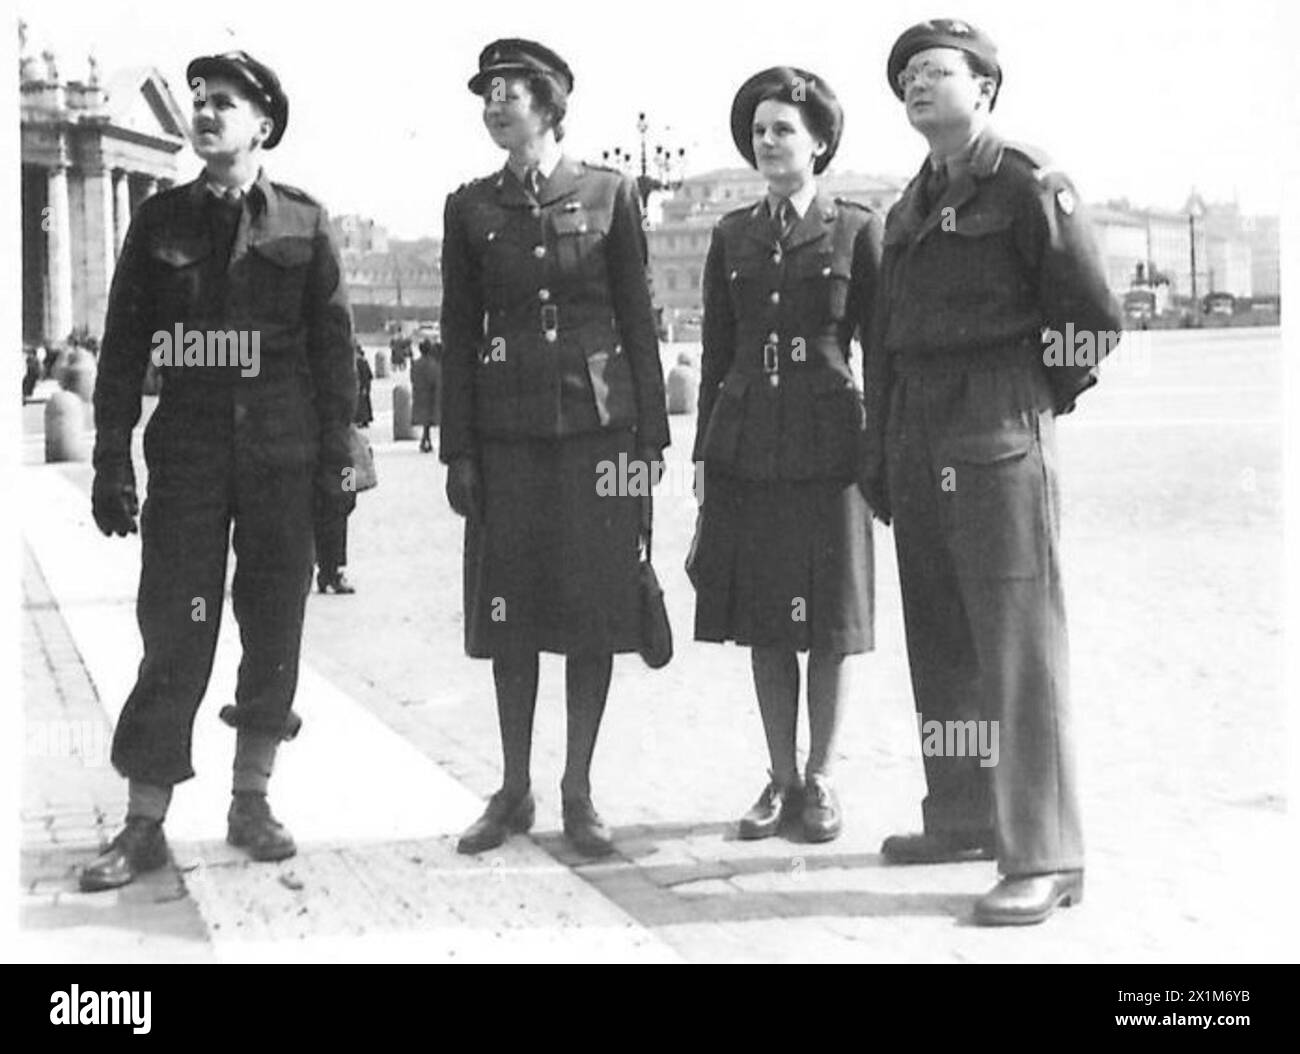 AMERICAN FIELD SERVICE WITH THE EIGHTH ARMY - Left to right:- Hoyt Harman of Albany, N.Y., USA., Sister G.H.I. Salter of Norfolk, England, Sister V.J. Davis of Swansea, S.Wales Tom Webber of Arkansas, USA. In the forecourt of St. Peter's Church, Rome, they admire the facade of the world-famous Church, British Army Stock Photo